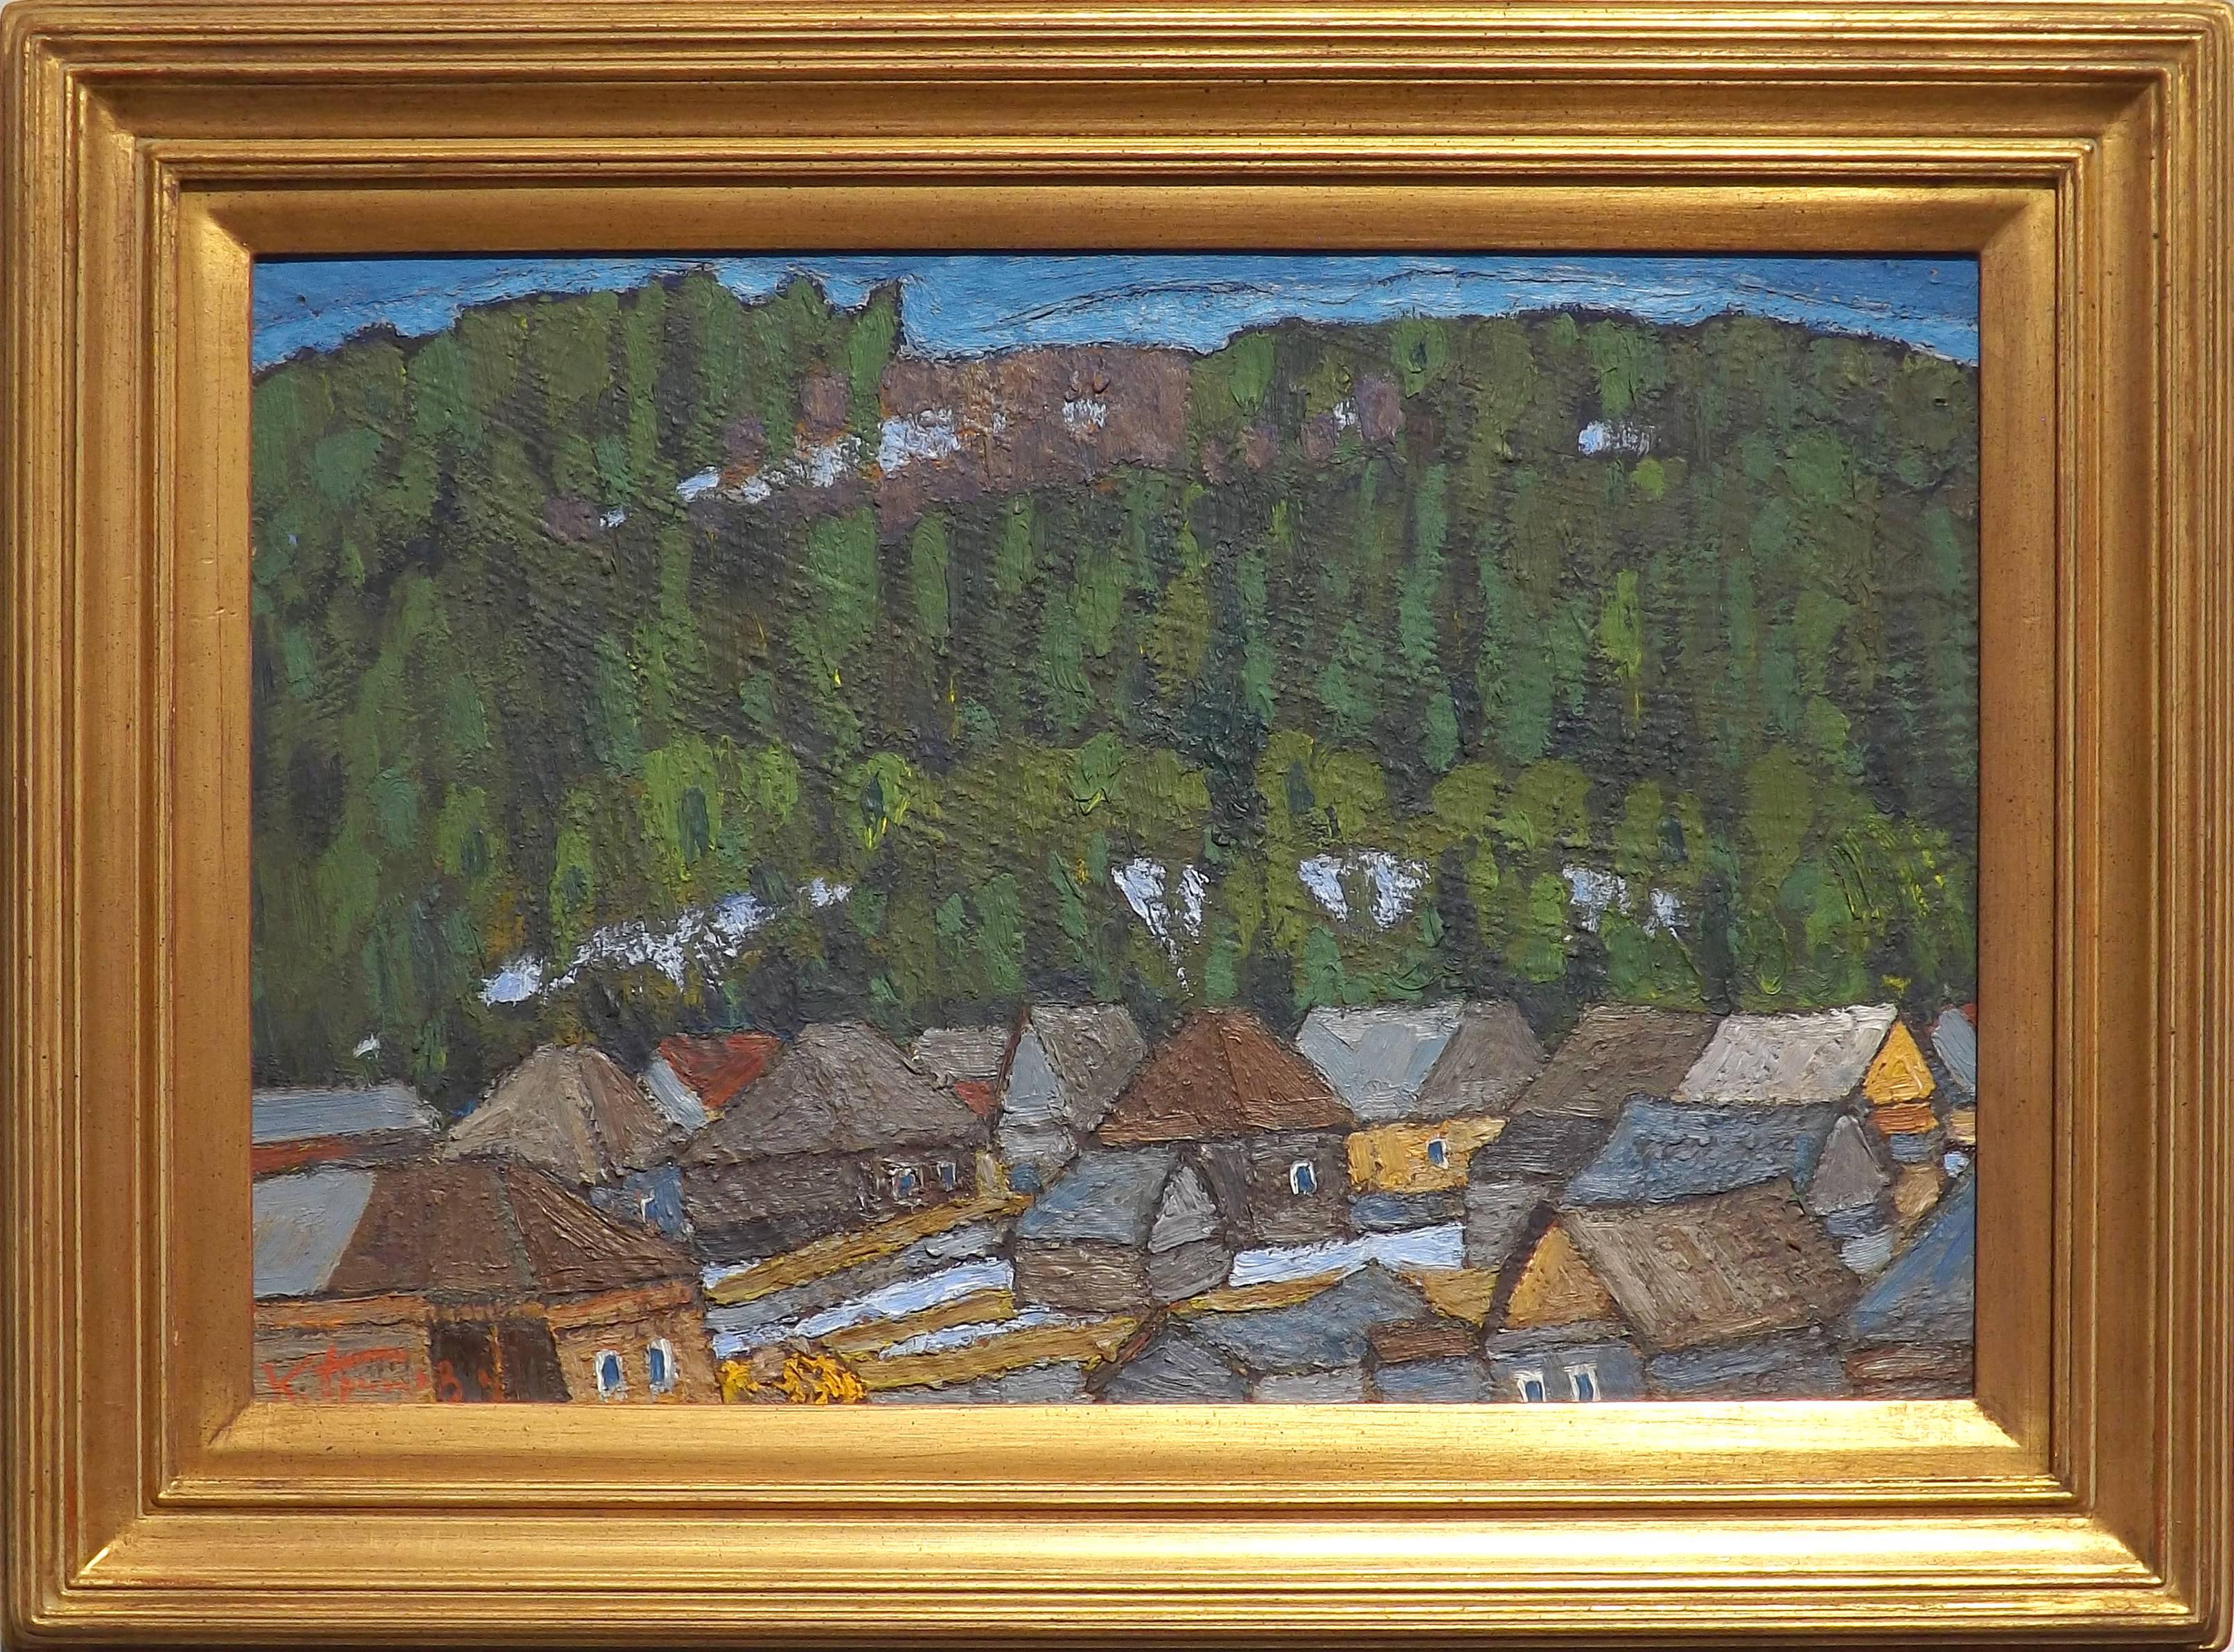 A thin strip of blue sky hangs over a sleepy Russian village, small patches of snow remain on the ground and amongst the lush green trees covering the nearby mountain. A very atmospheric painting, simply titled 'Ural Motif', painted by the great